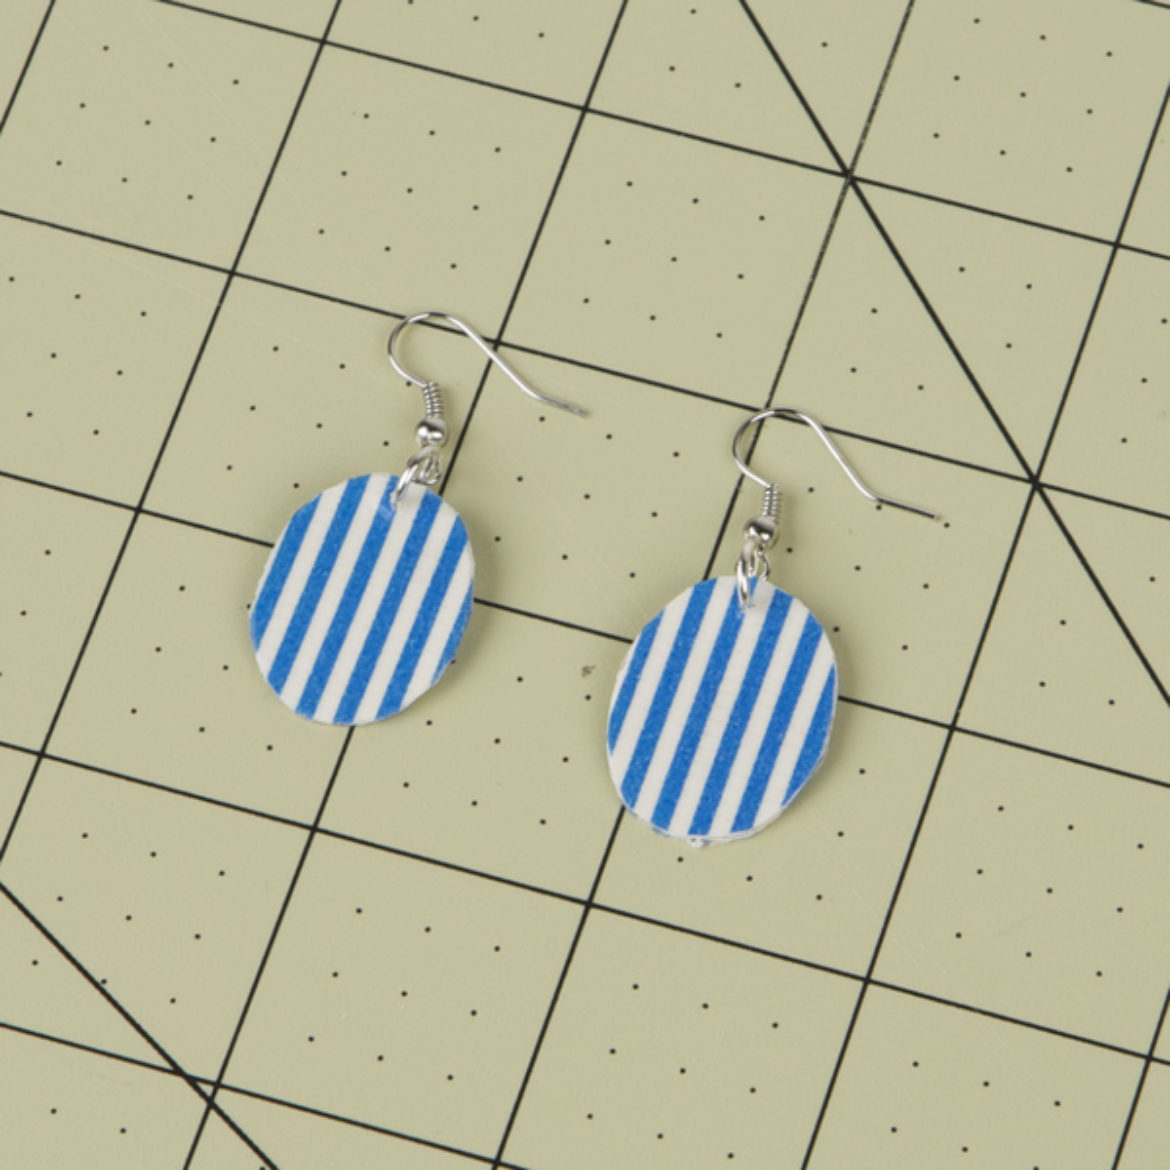 Previous steps repeated to create a matching earring